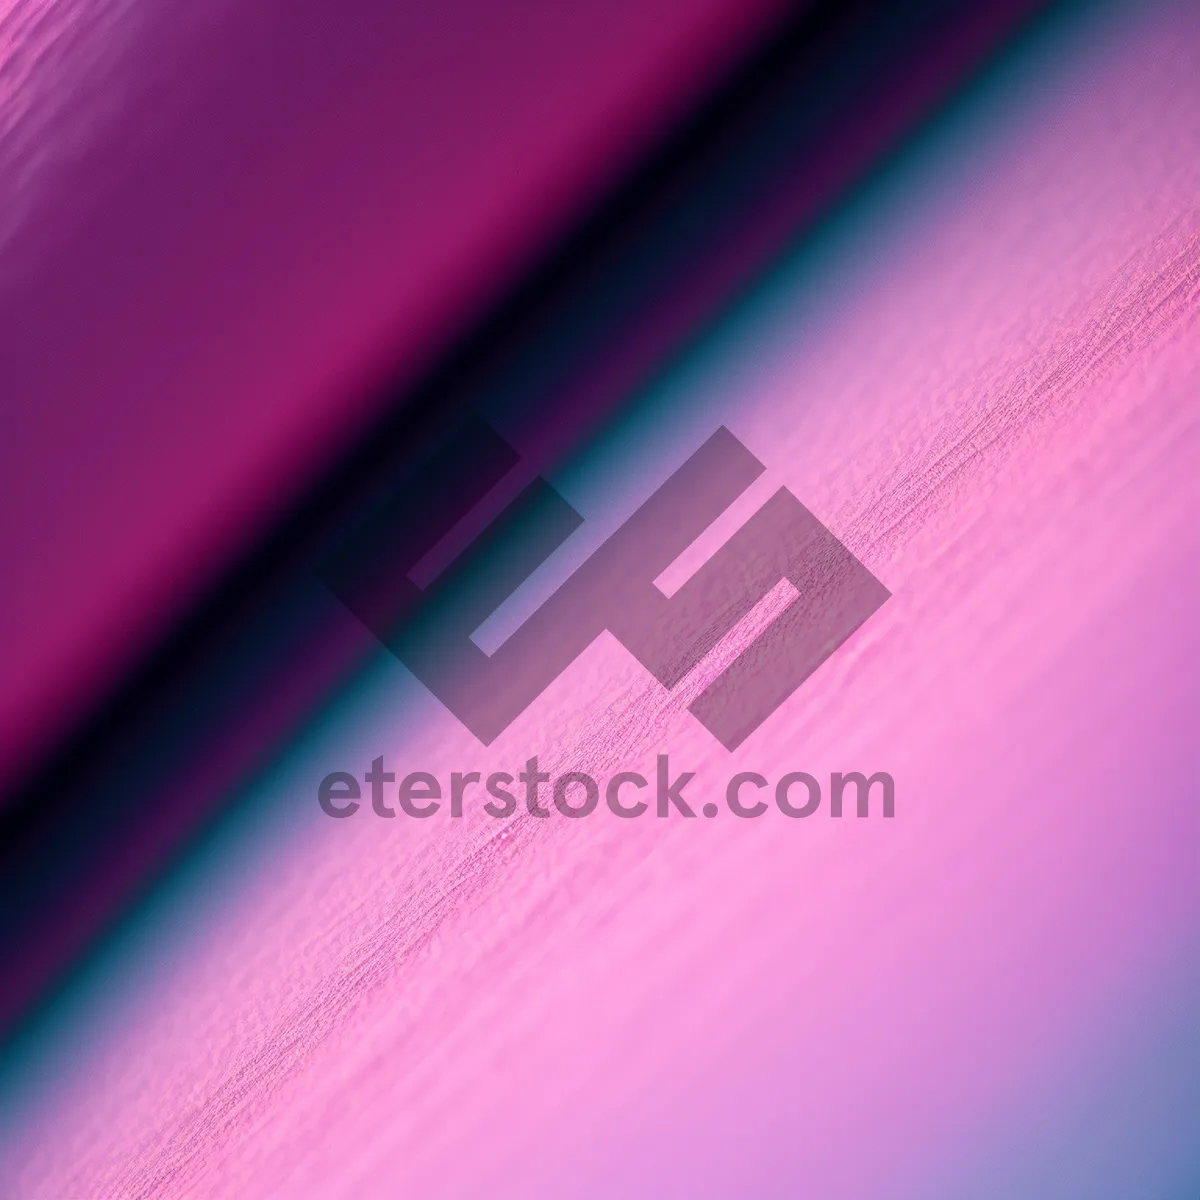 Picture of Plasma Motion: Lilac Fantasy in Digital Art